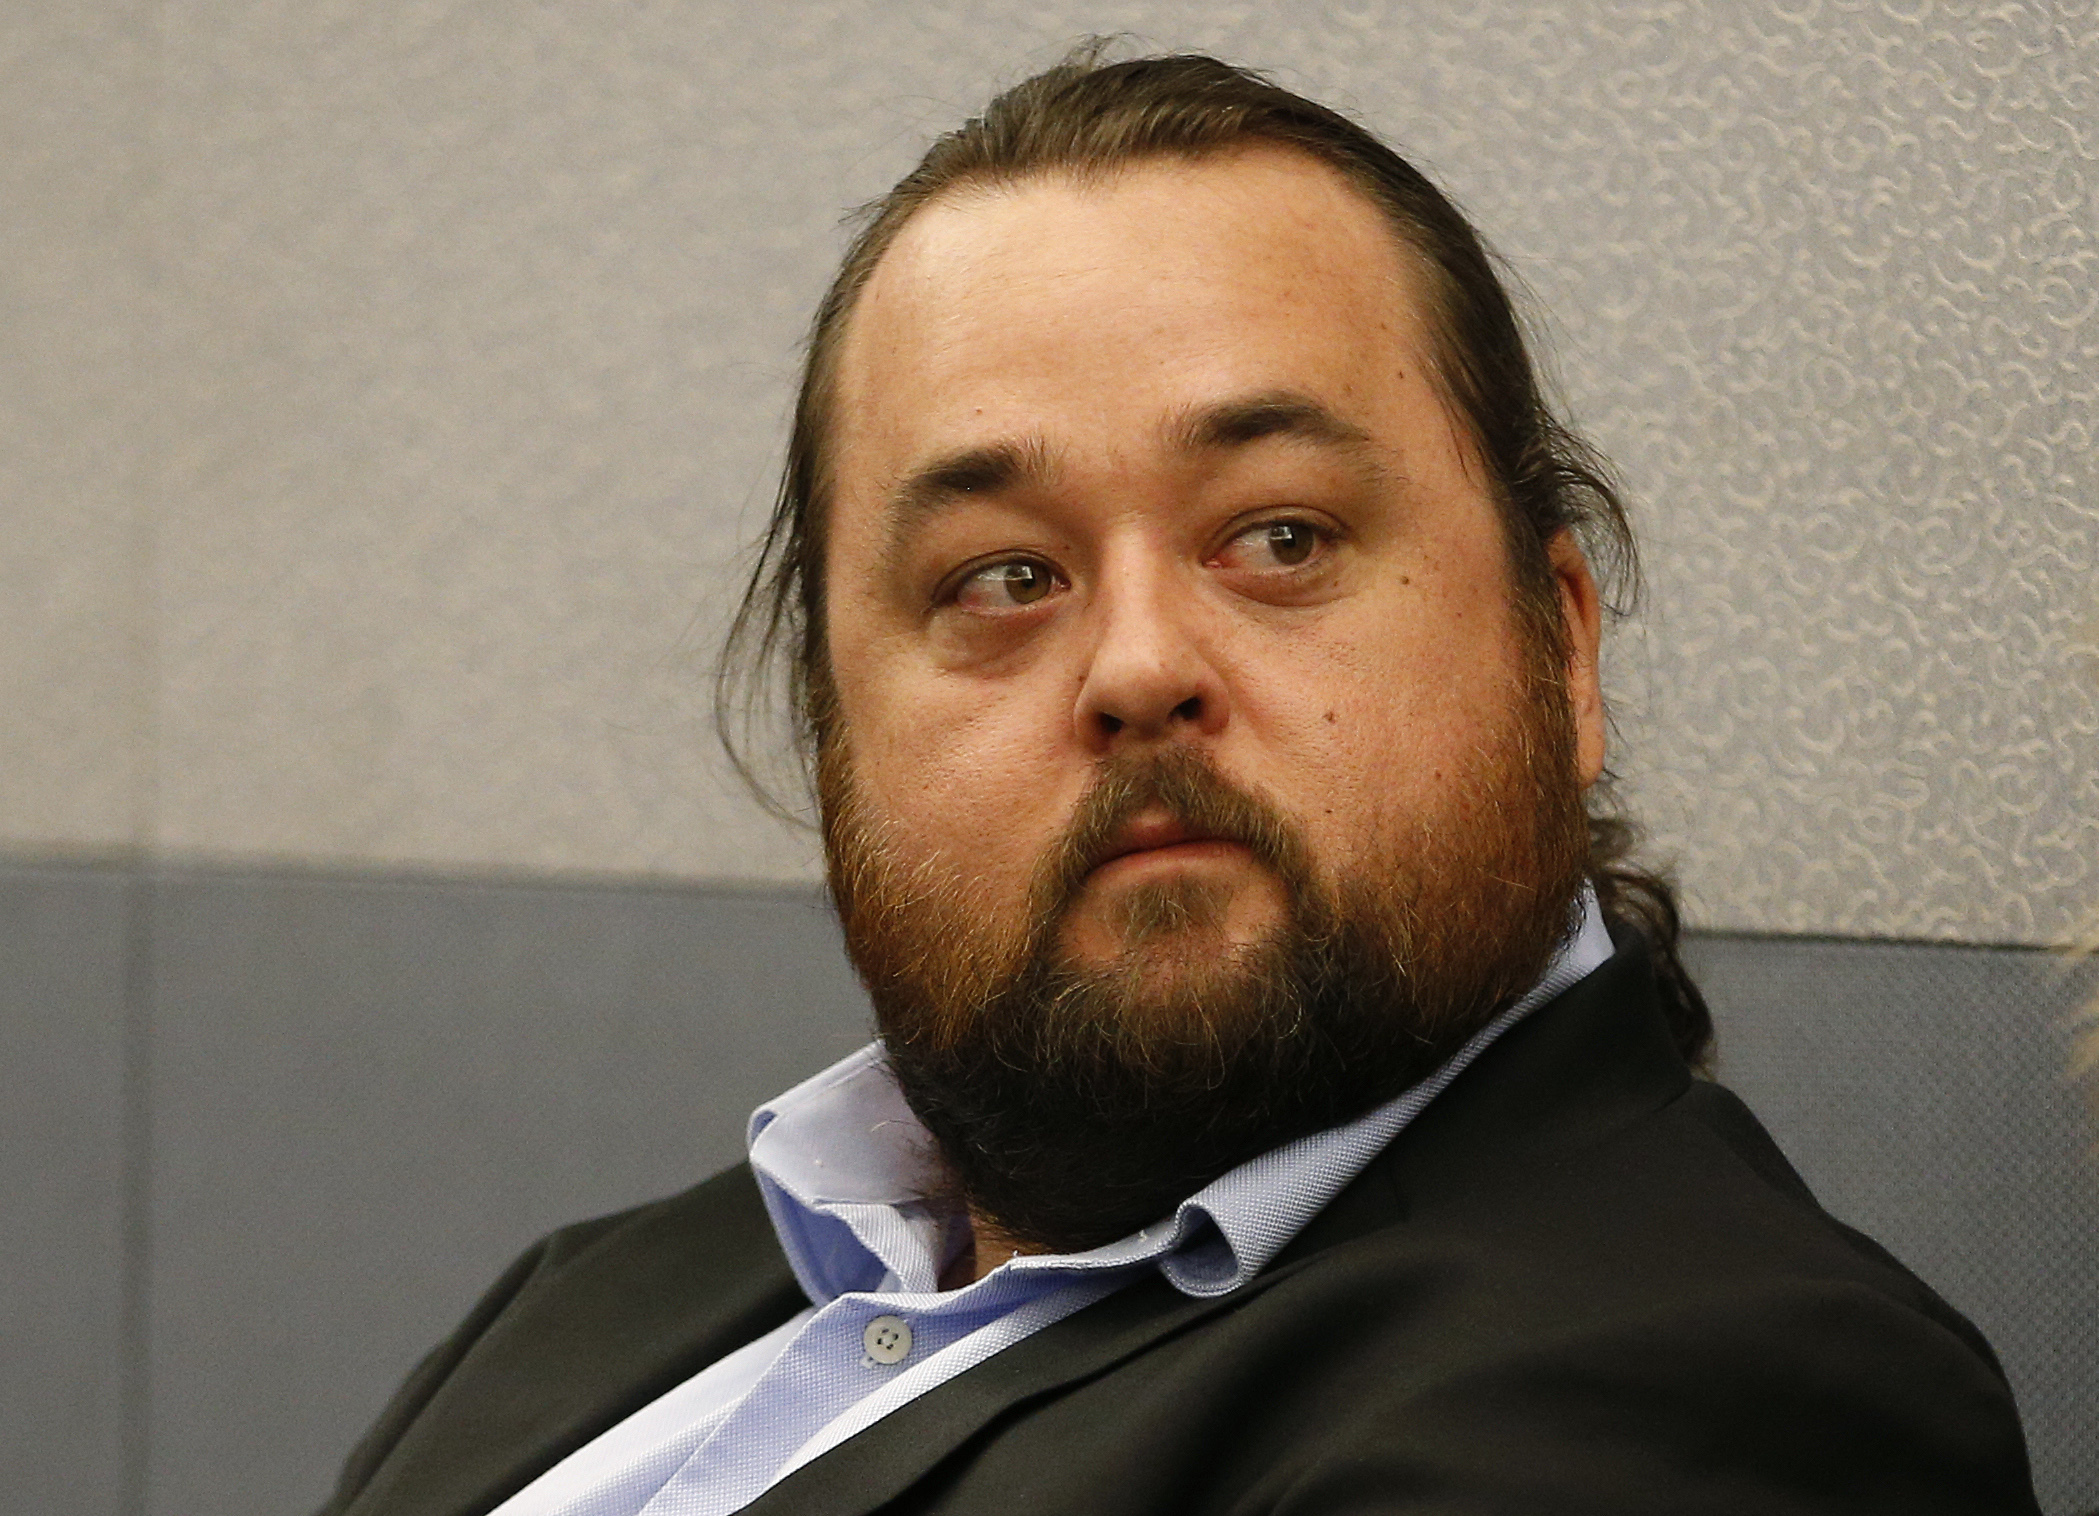 pawn stars chumlee now